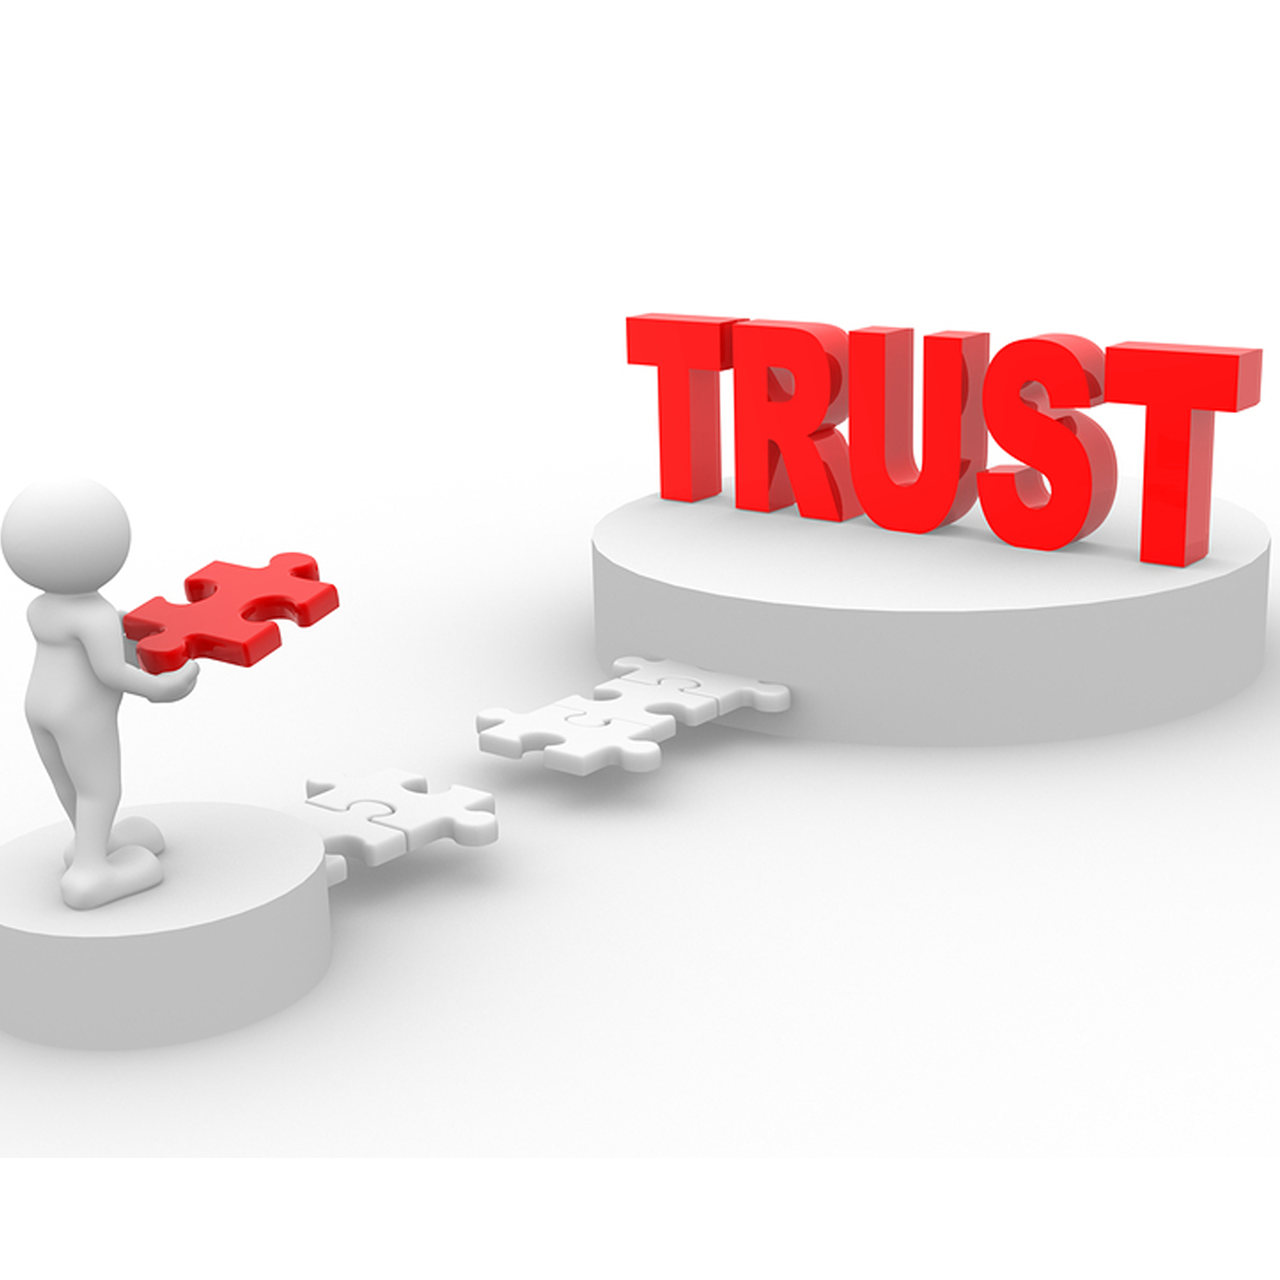 The Power of Trust